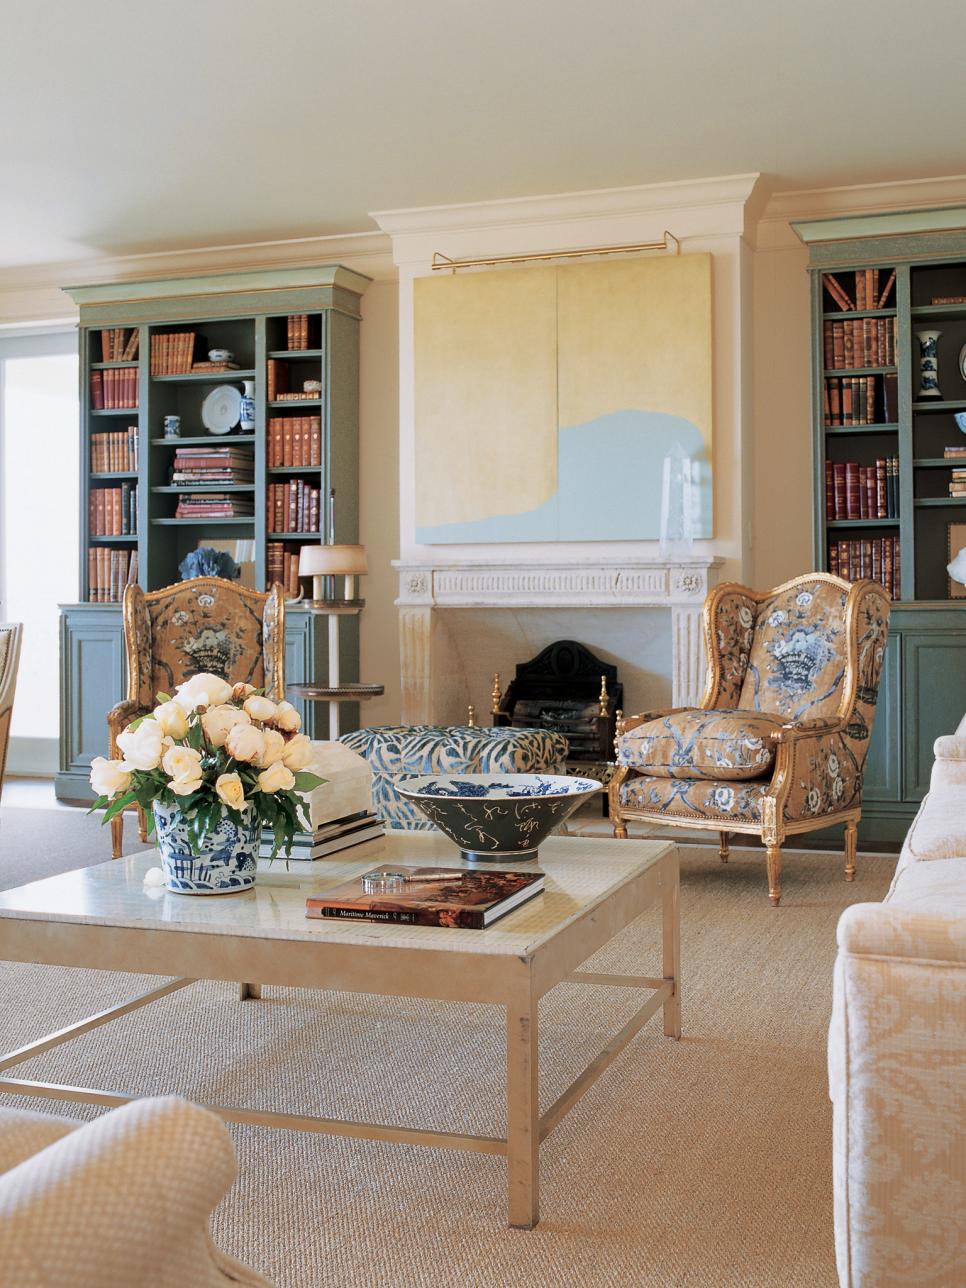 Living Room With White Limestone Fireplace and Bookcases